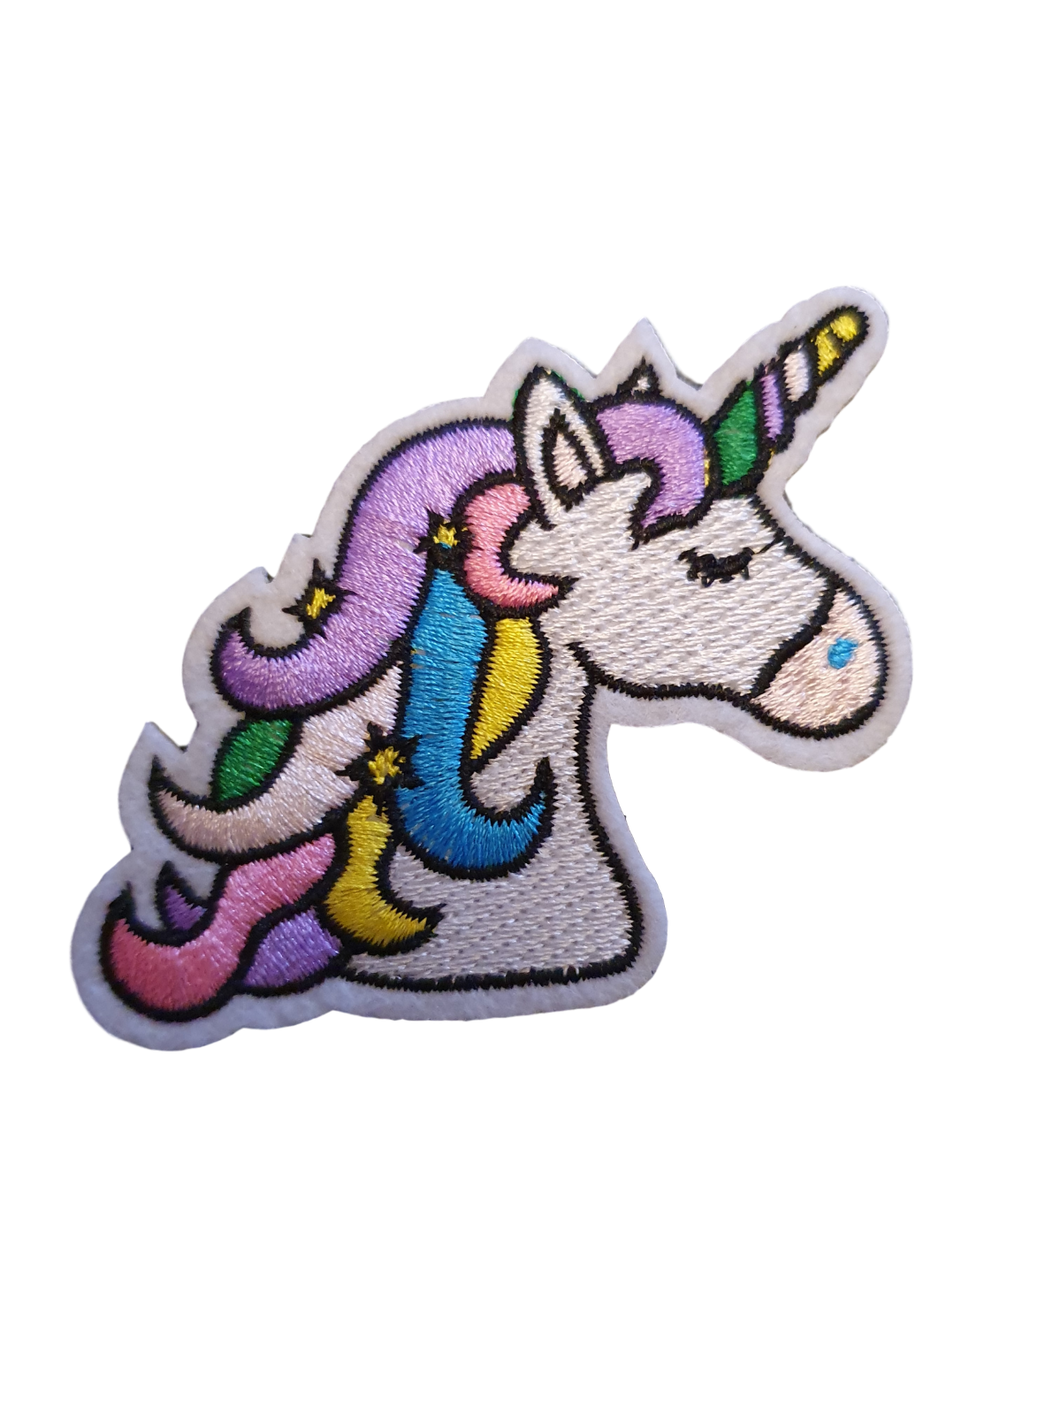 CUTE COLOURFUL UNICORN KIDS IRON ON CLOTH EMBROIDERY PATCH CLOTHES BAGS 5.5cm